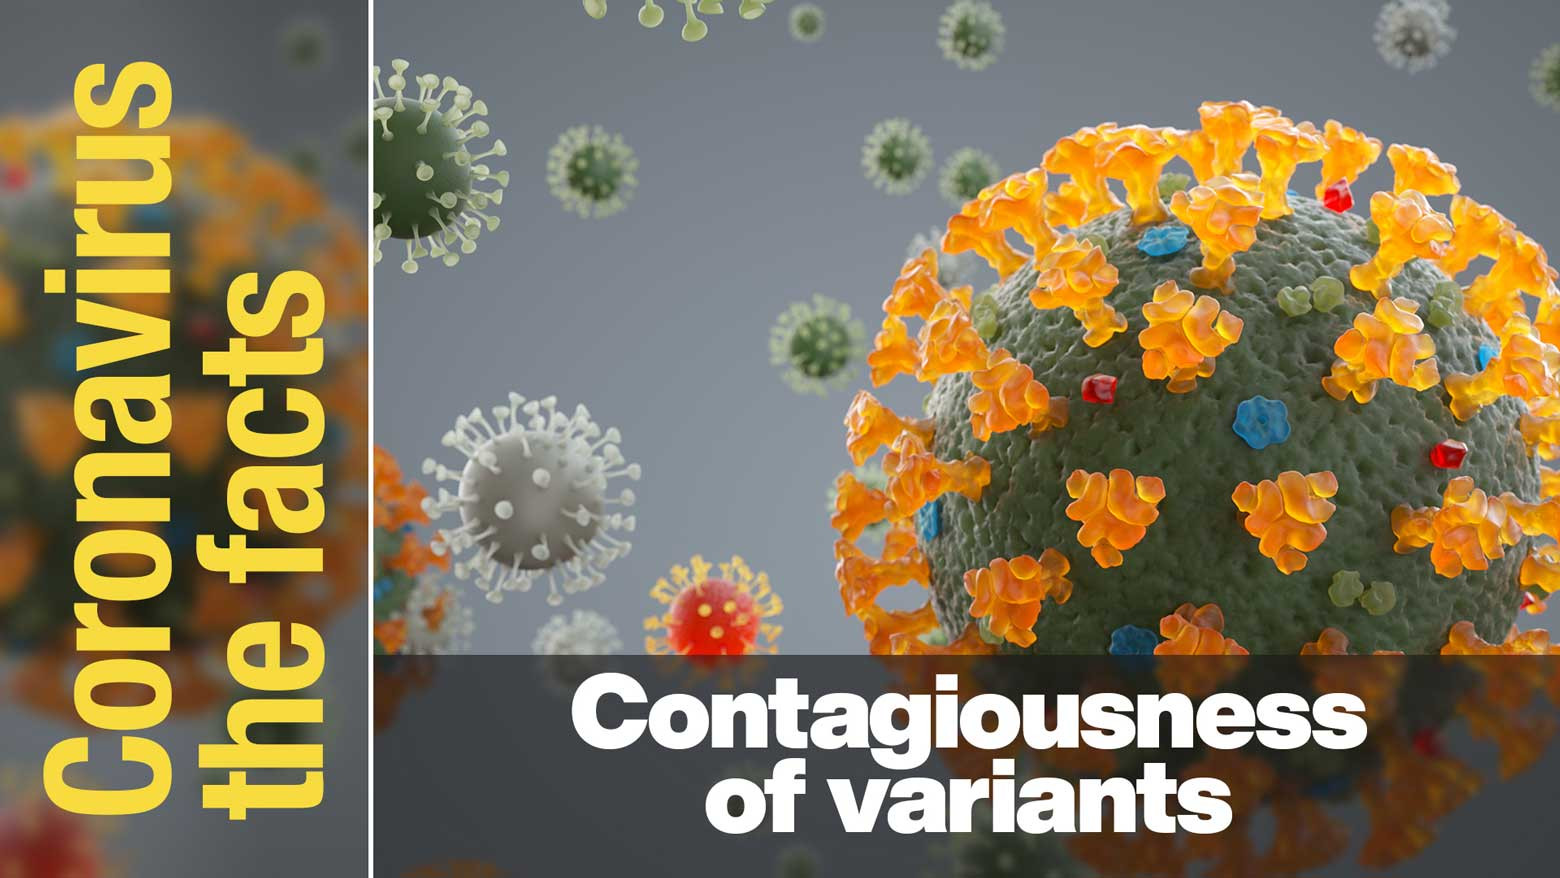 How contagious are the variants?